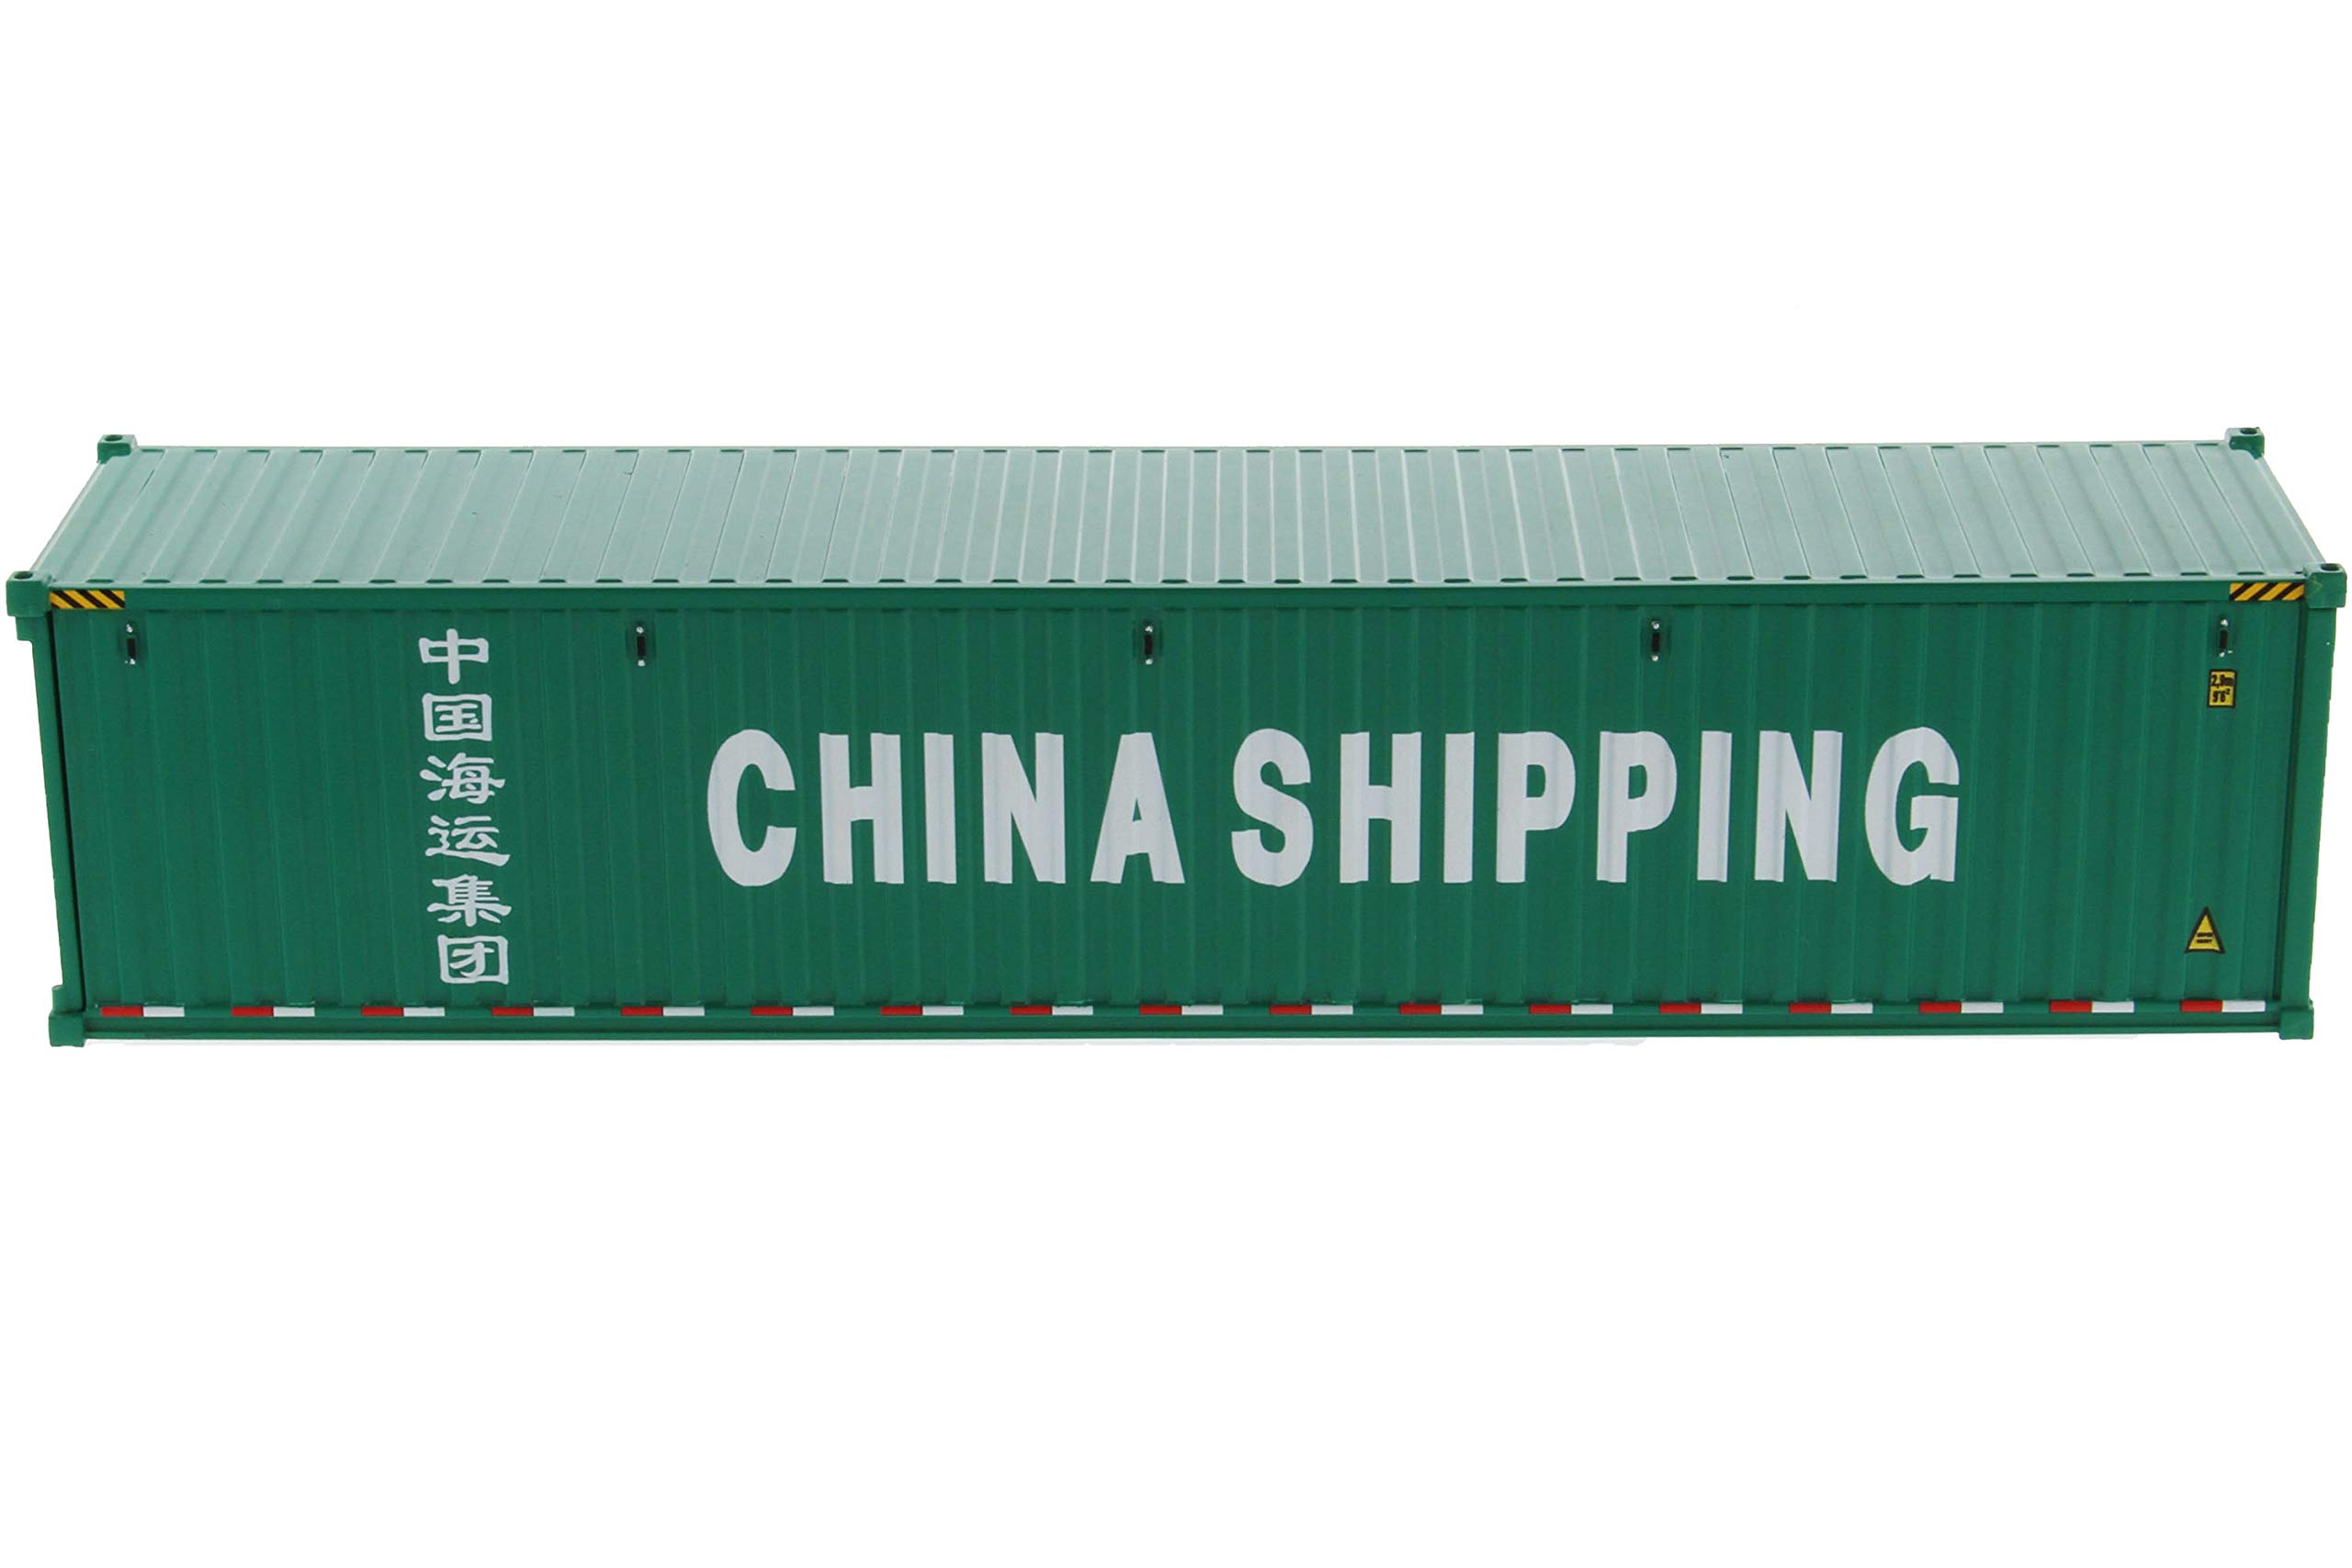 40' Dry Goods Sea Container China Shipping Green Transport Series 1/50 Model by Diecast Masters 91027 C